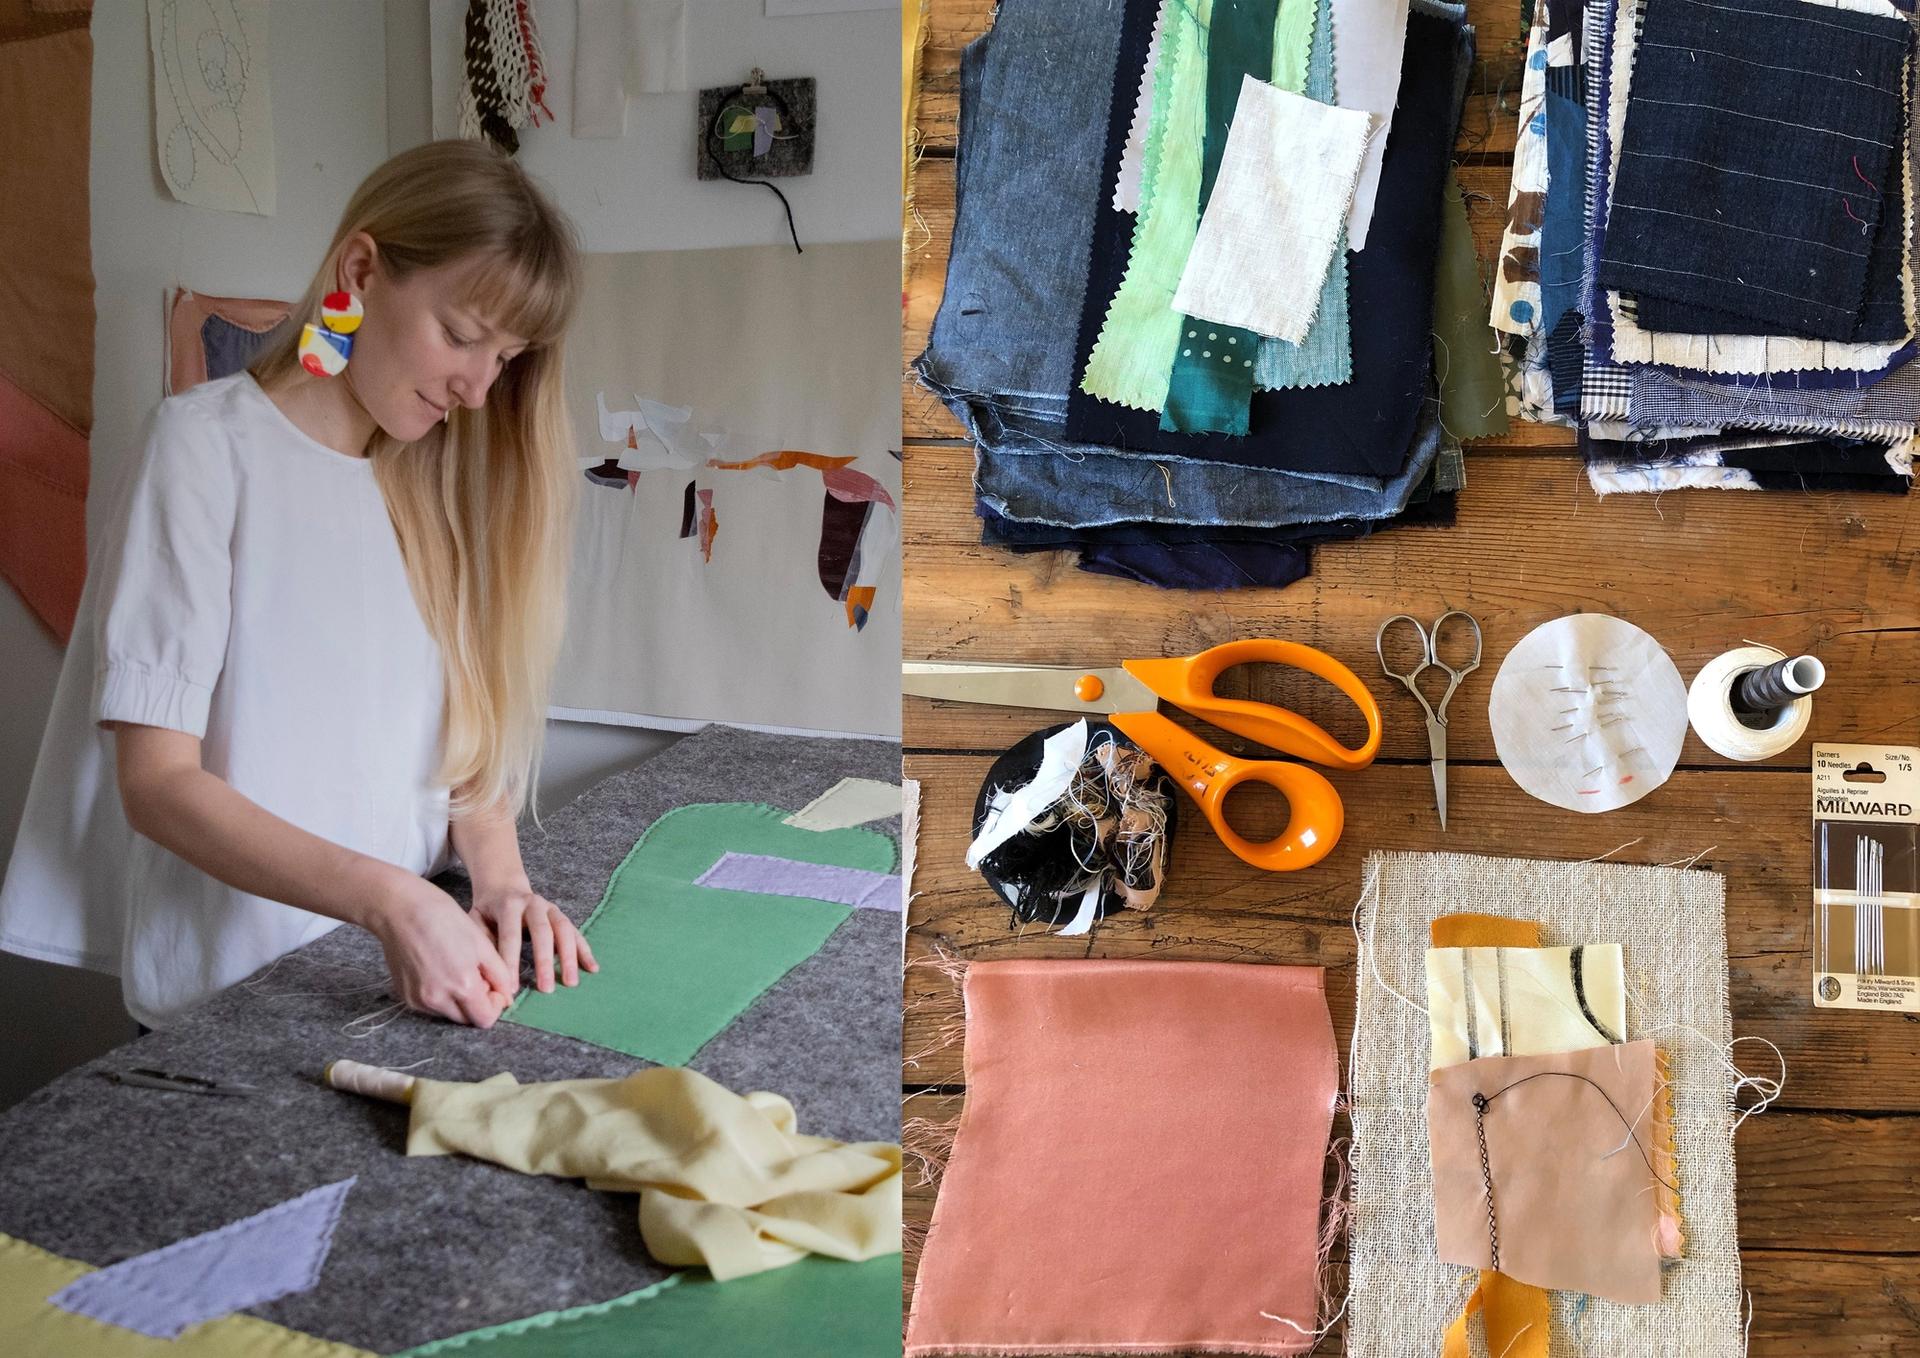 An image is plsit down the centre. On the left is a photograph of a young woman with long blonde hair, wearing a white t-shirt and colourful hanging earrings. She is stood at a textiles table pinning pieces of fabric together, she is concentrated in her work and looking down at it serenly. On the right is a photograhp taken from above of a wooden table with many scraps of fabric piled up tidily, in between the scraps of fabric are tools used for textiles, such as scissors, needles and thread.